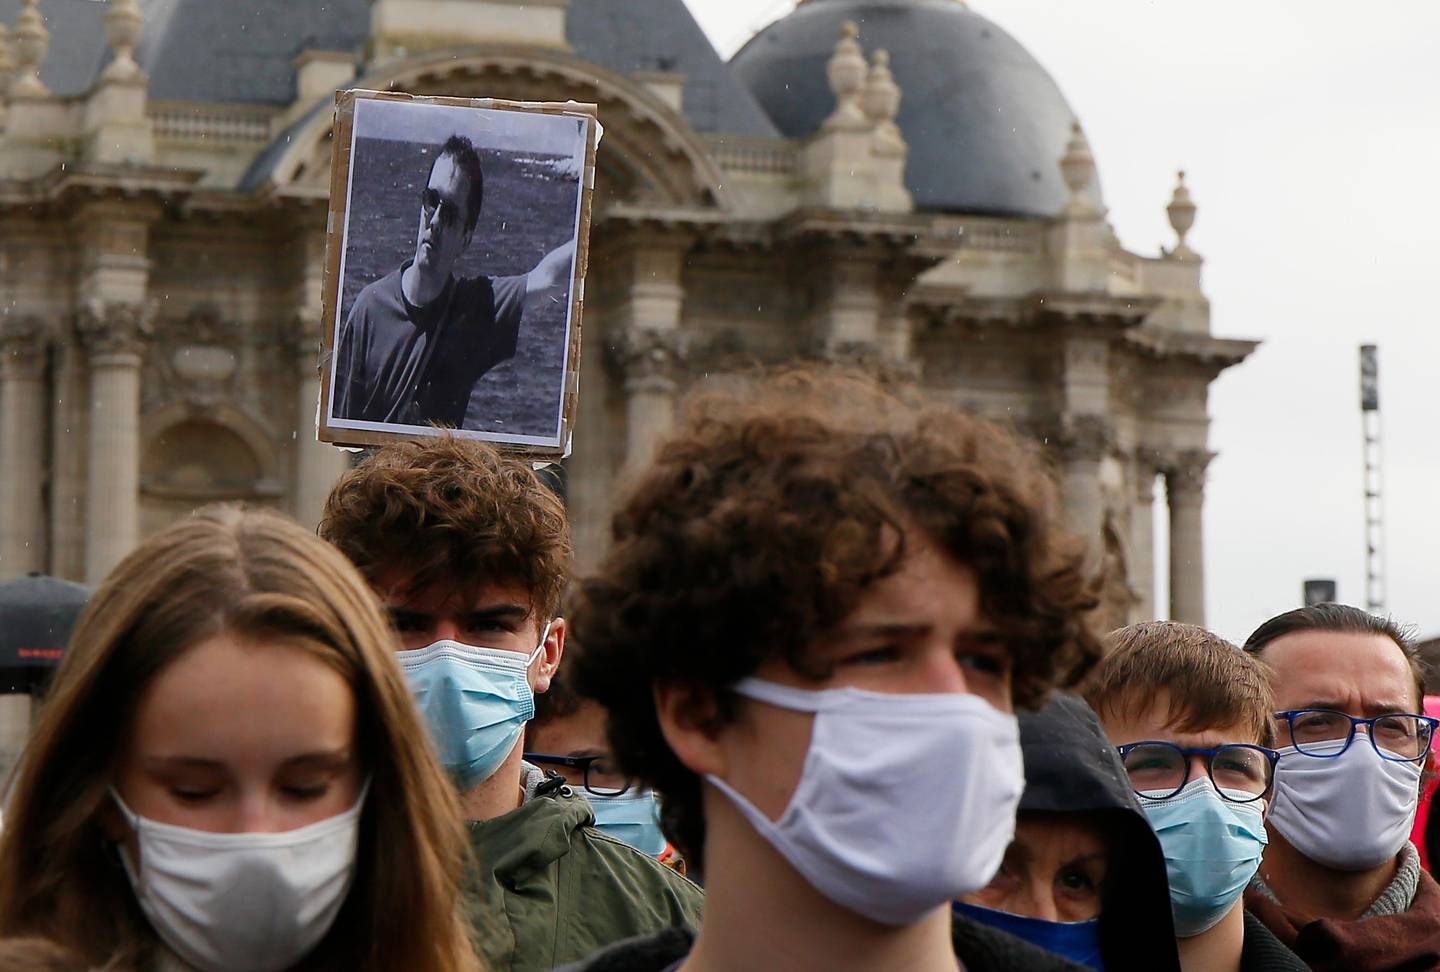 A portrait of Samuel Paty is held up as people gather on Republique square in Lille, northern France, Sunday Oct. 18, 2020. Demonstrators in France on Sunday took part in gatherings in support of freedom of speech and in tribute to a history teacher who was beheaded near Paris after discussing caricatures of Islams Prophet Muhammad with his class. (AP Photo/Michel Spingler)